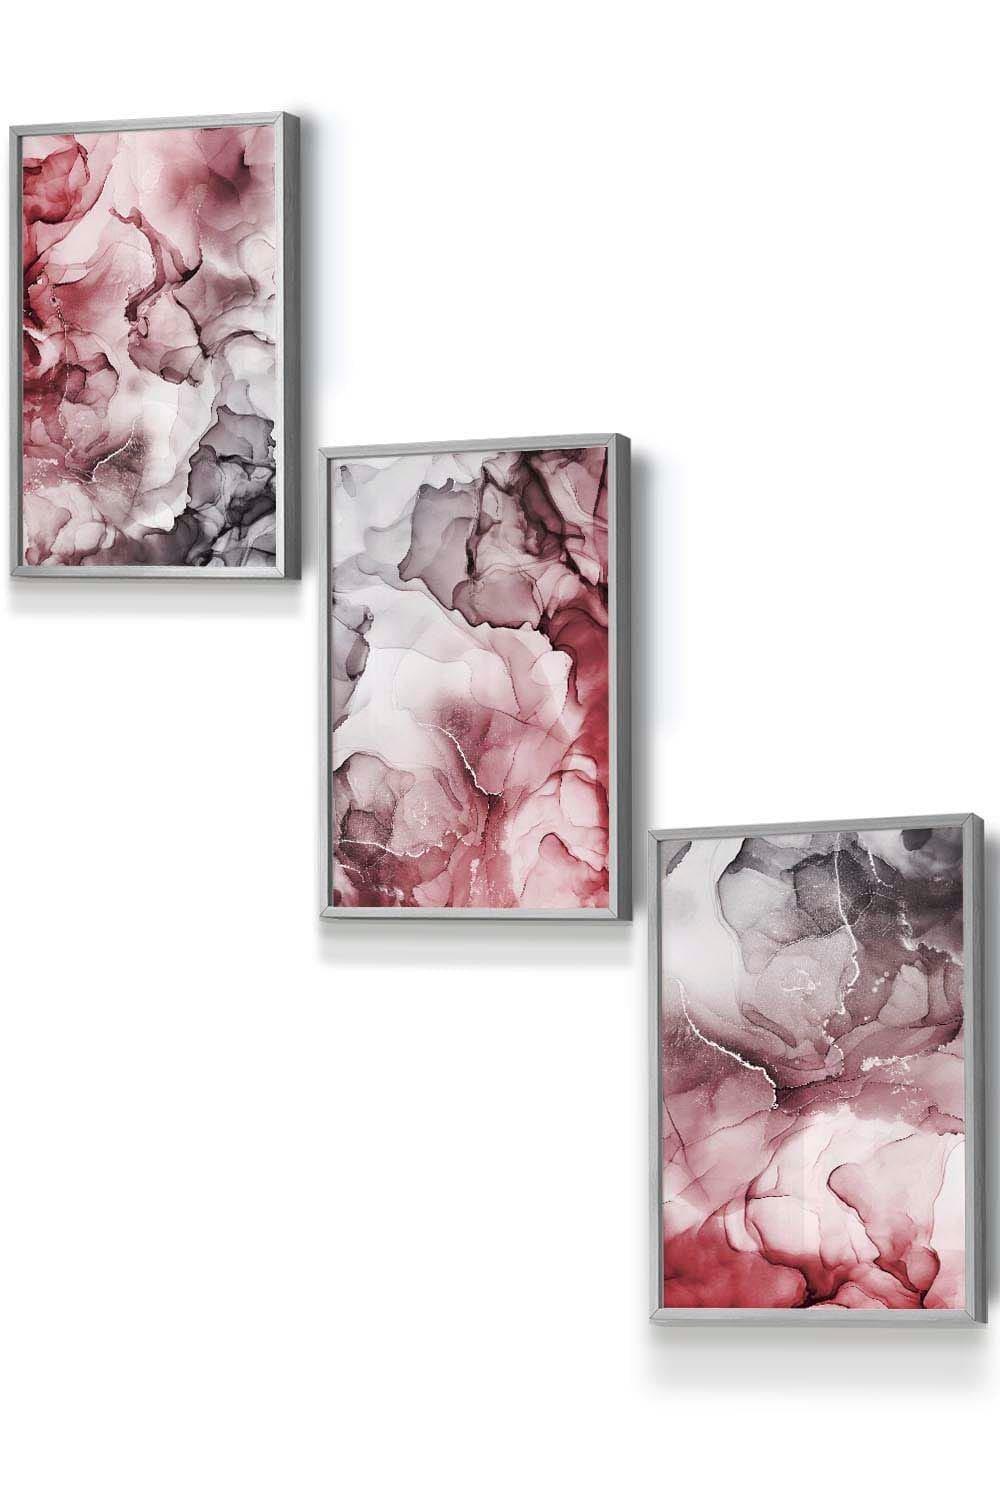 Abstract Floral Fluid in Red and Grey Framed Wall Art - Small